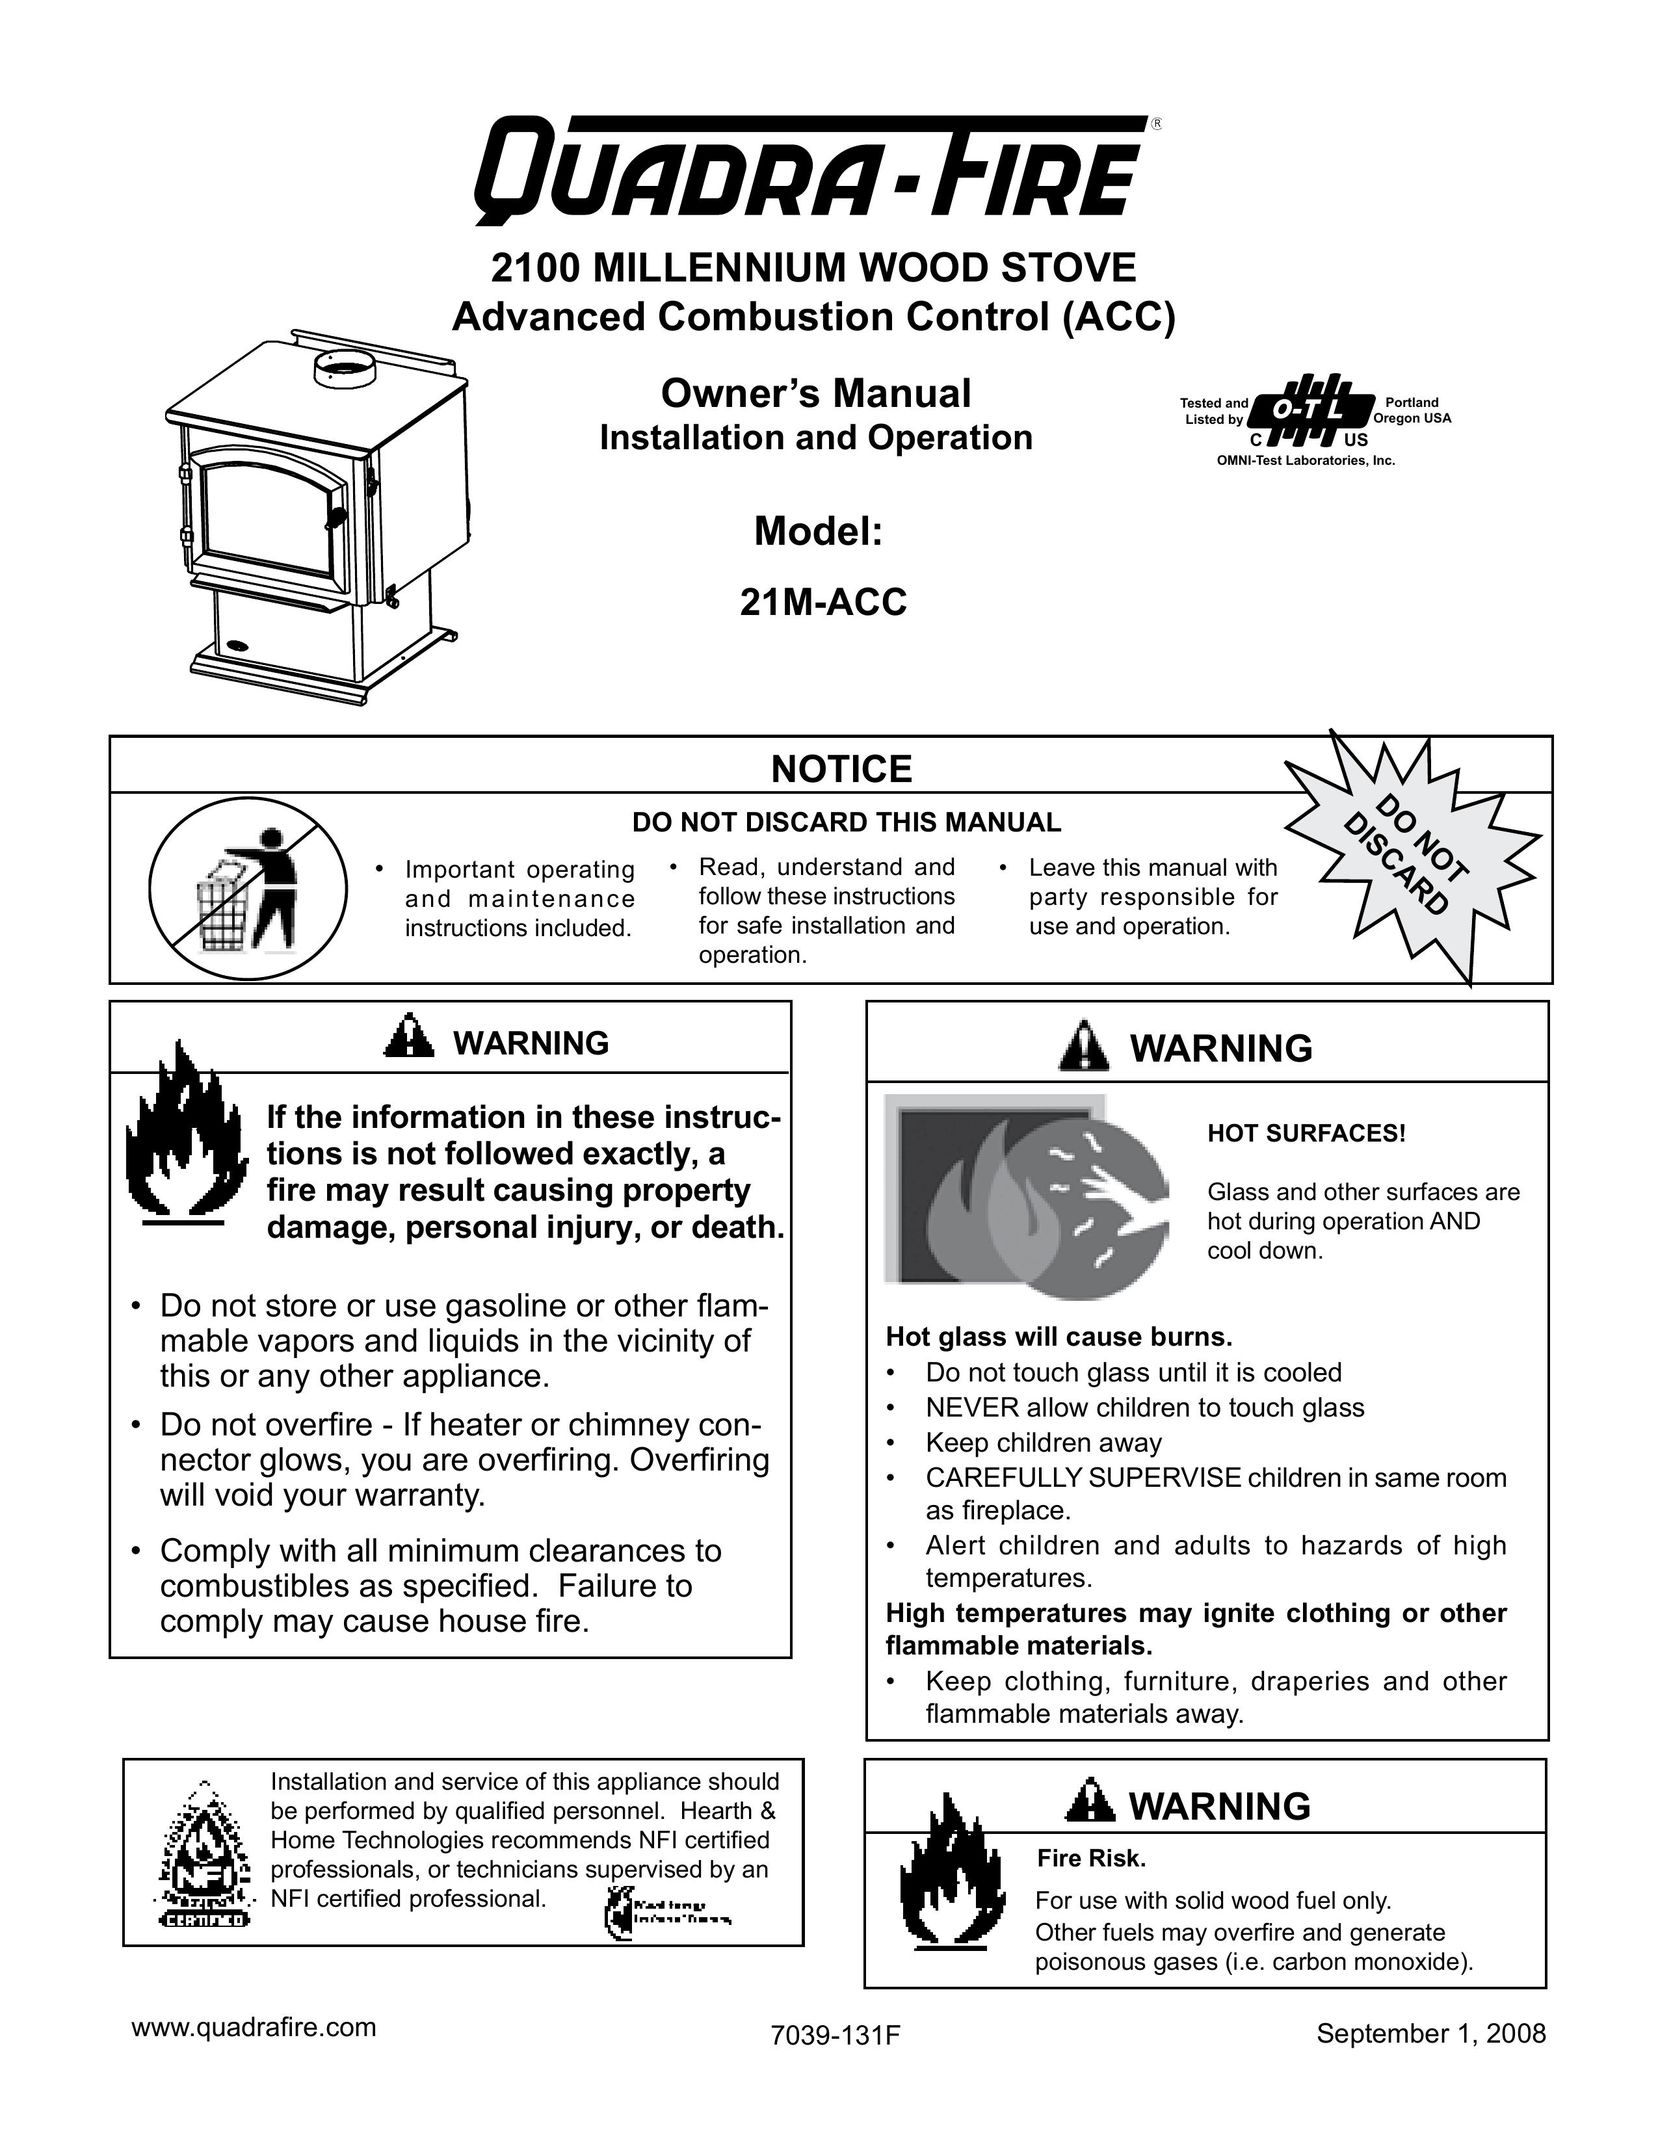 Hearth and Home Technologies 21M-ACC Stove User Manual